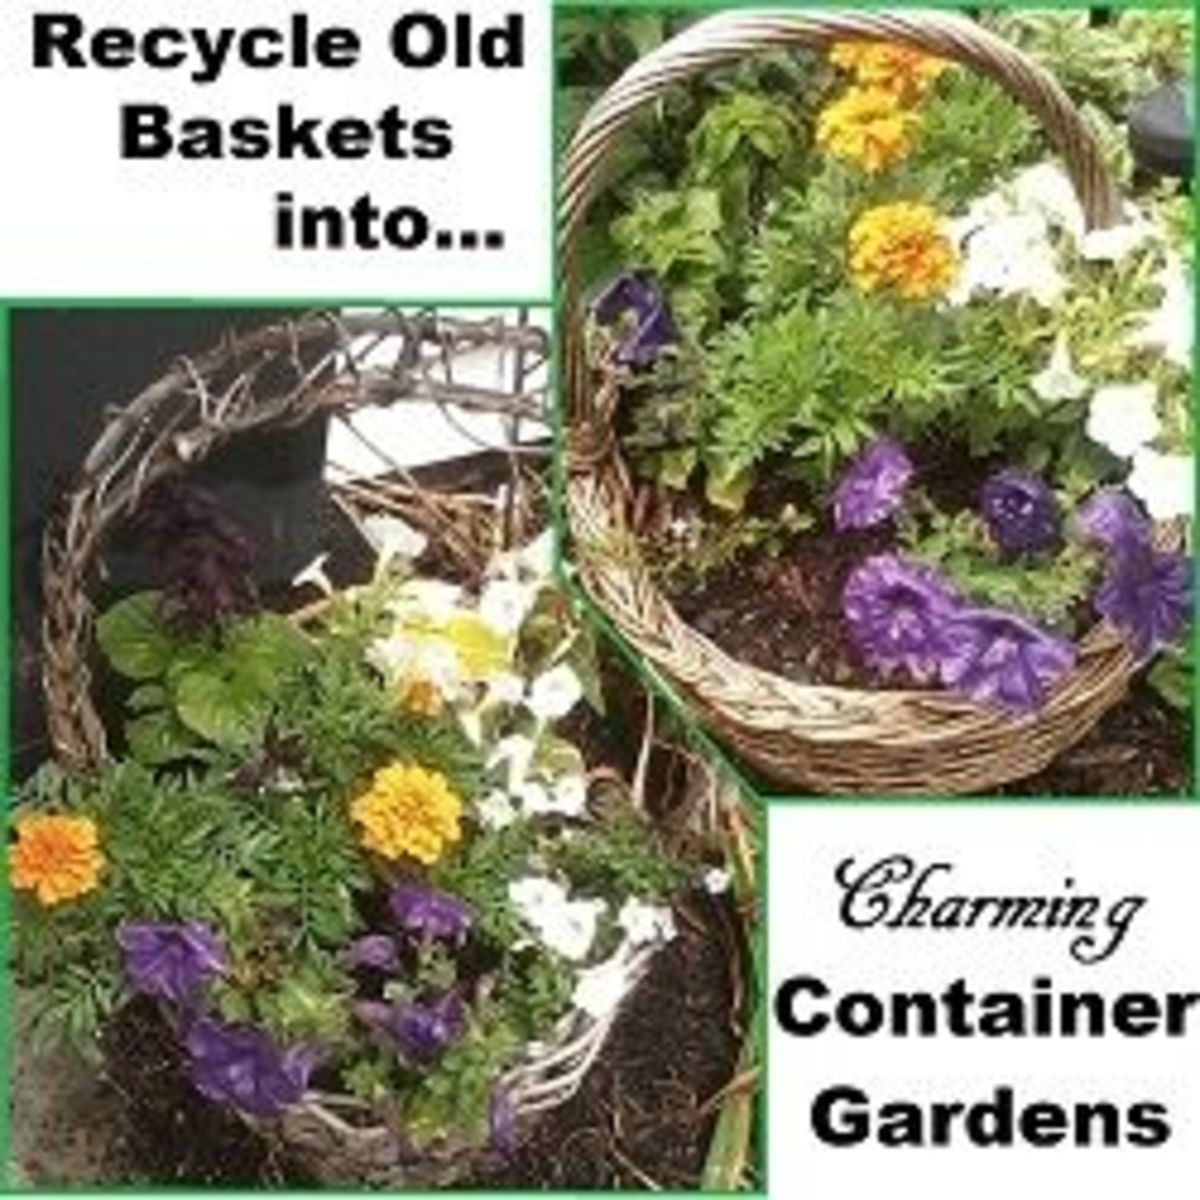 How to Recycle Old Baskets into Container Gardens